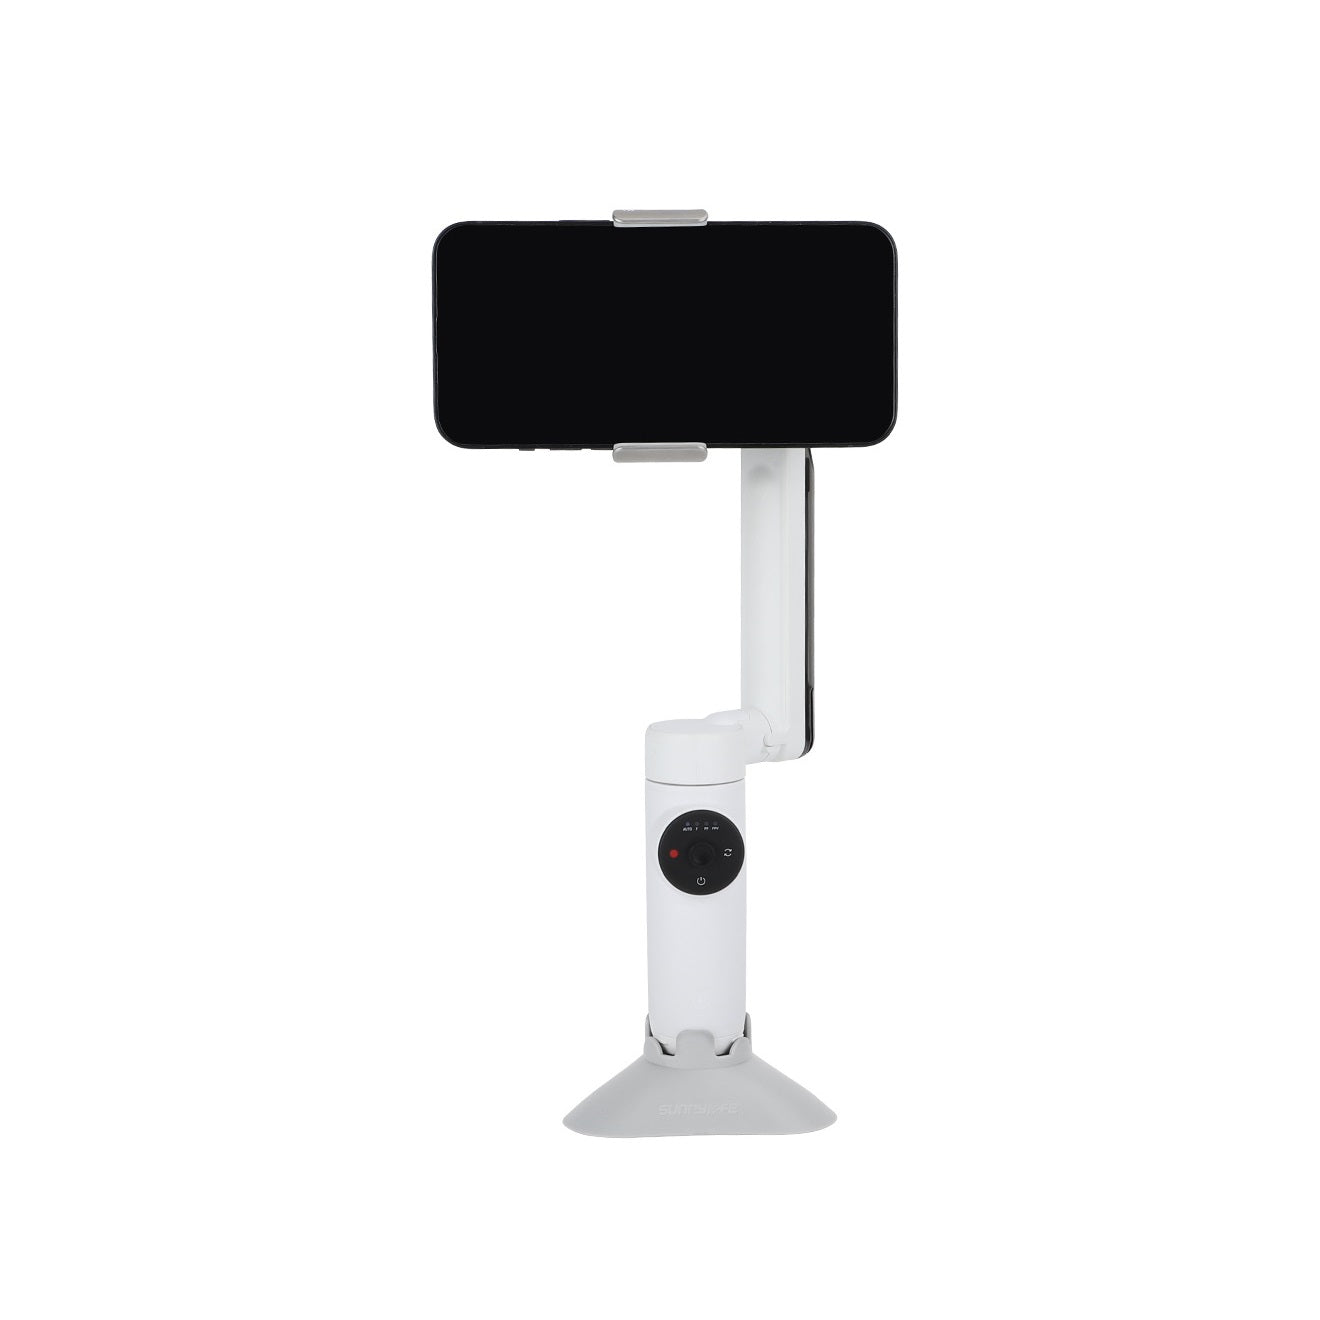 Stand Base for Insta360 Flow